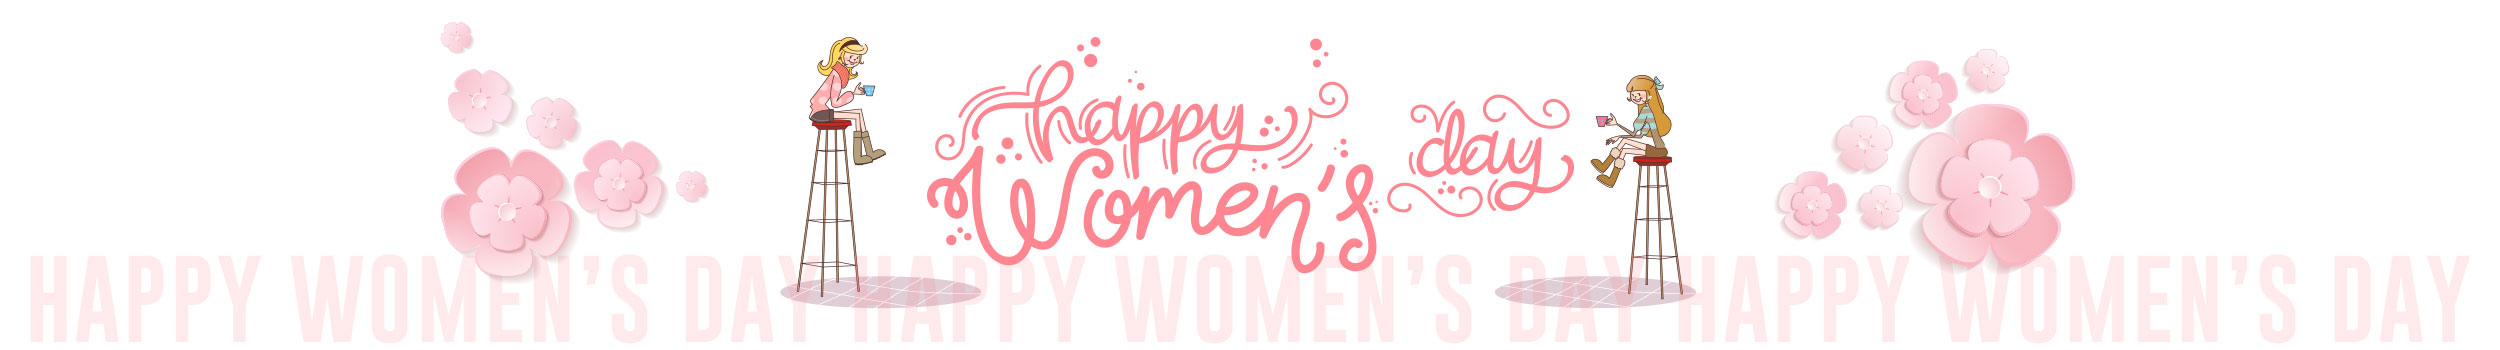 saigonflowers womens day vietnam page footer